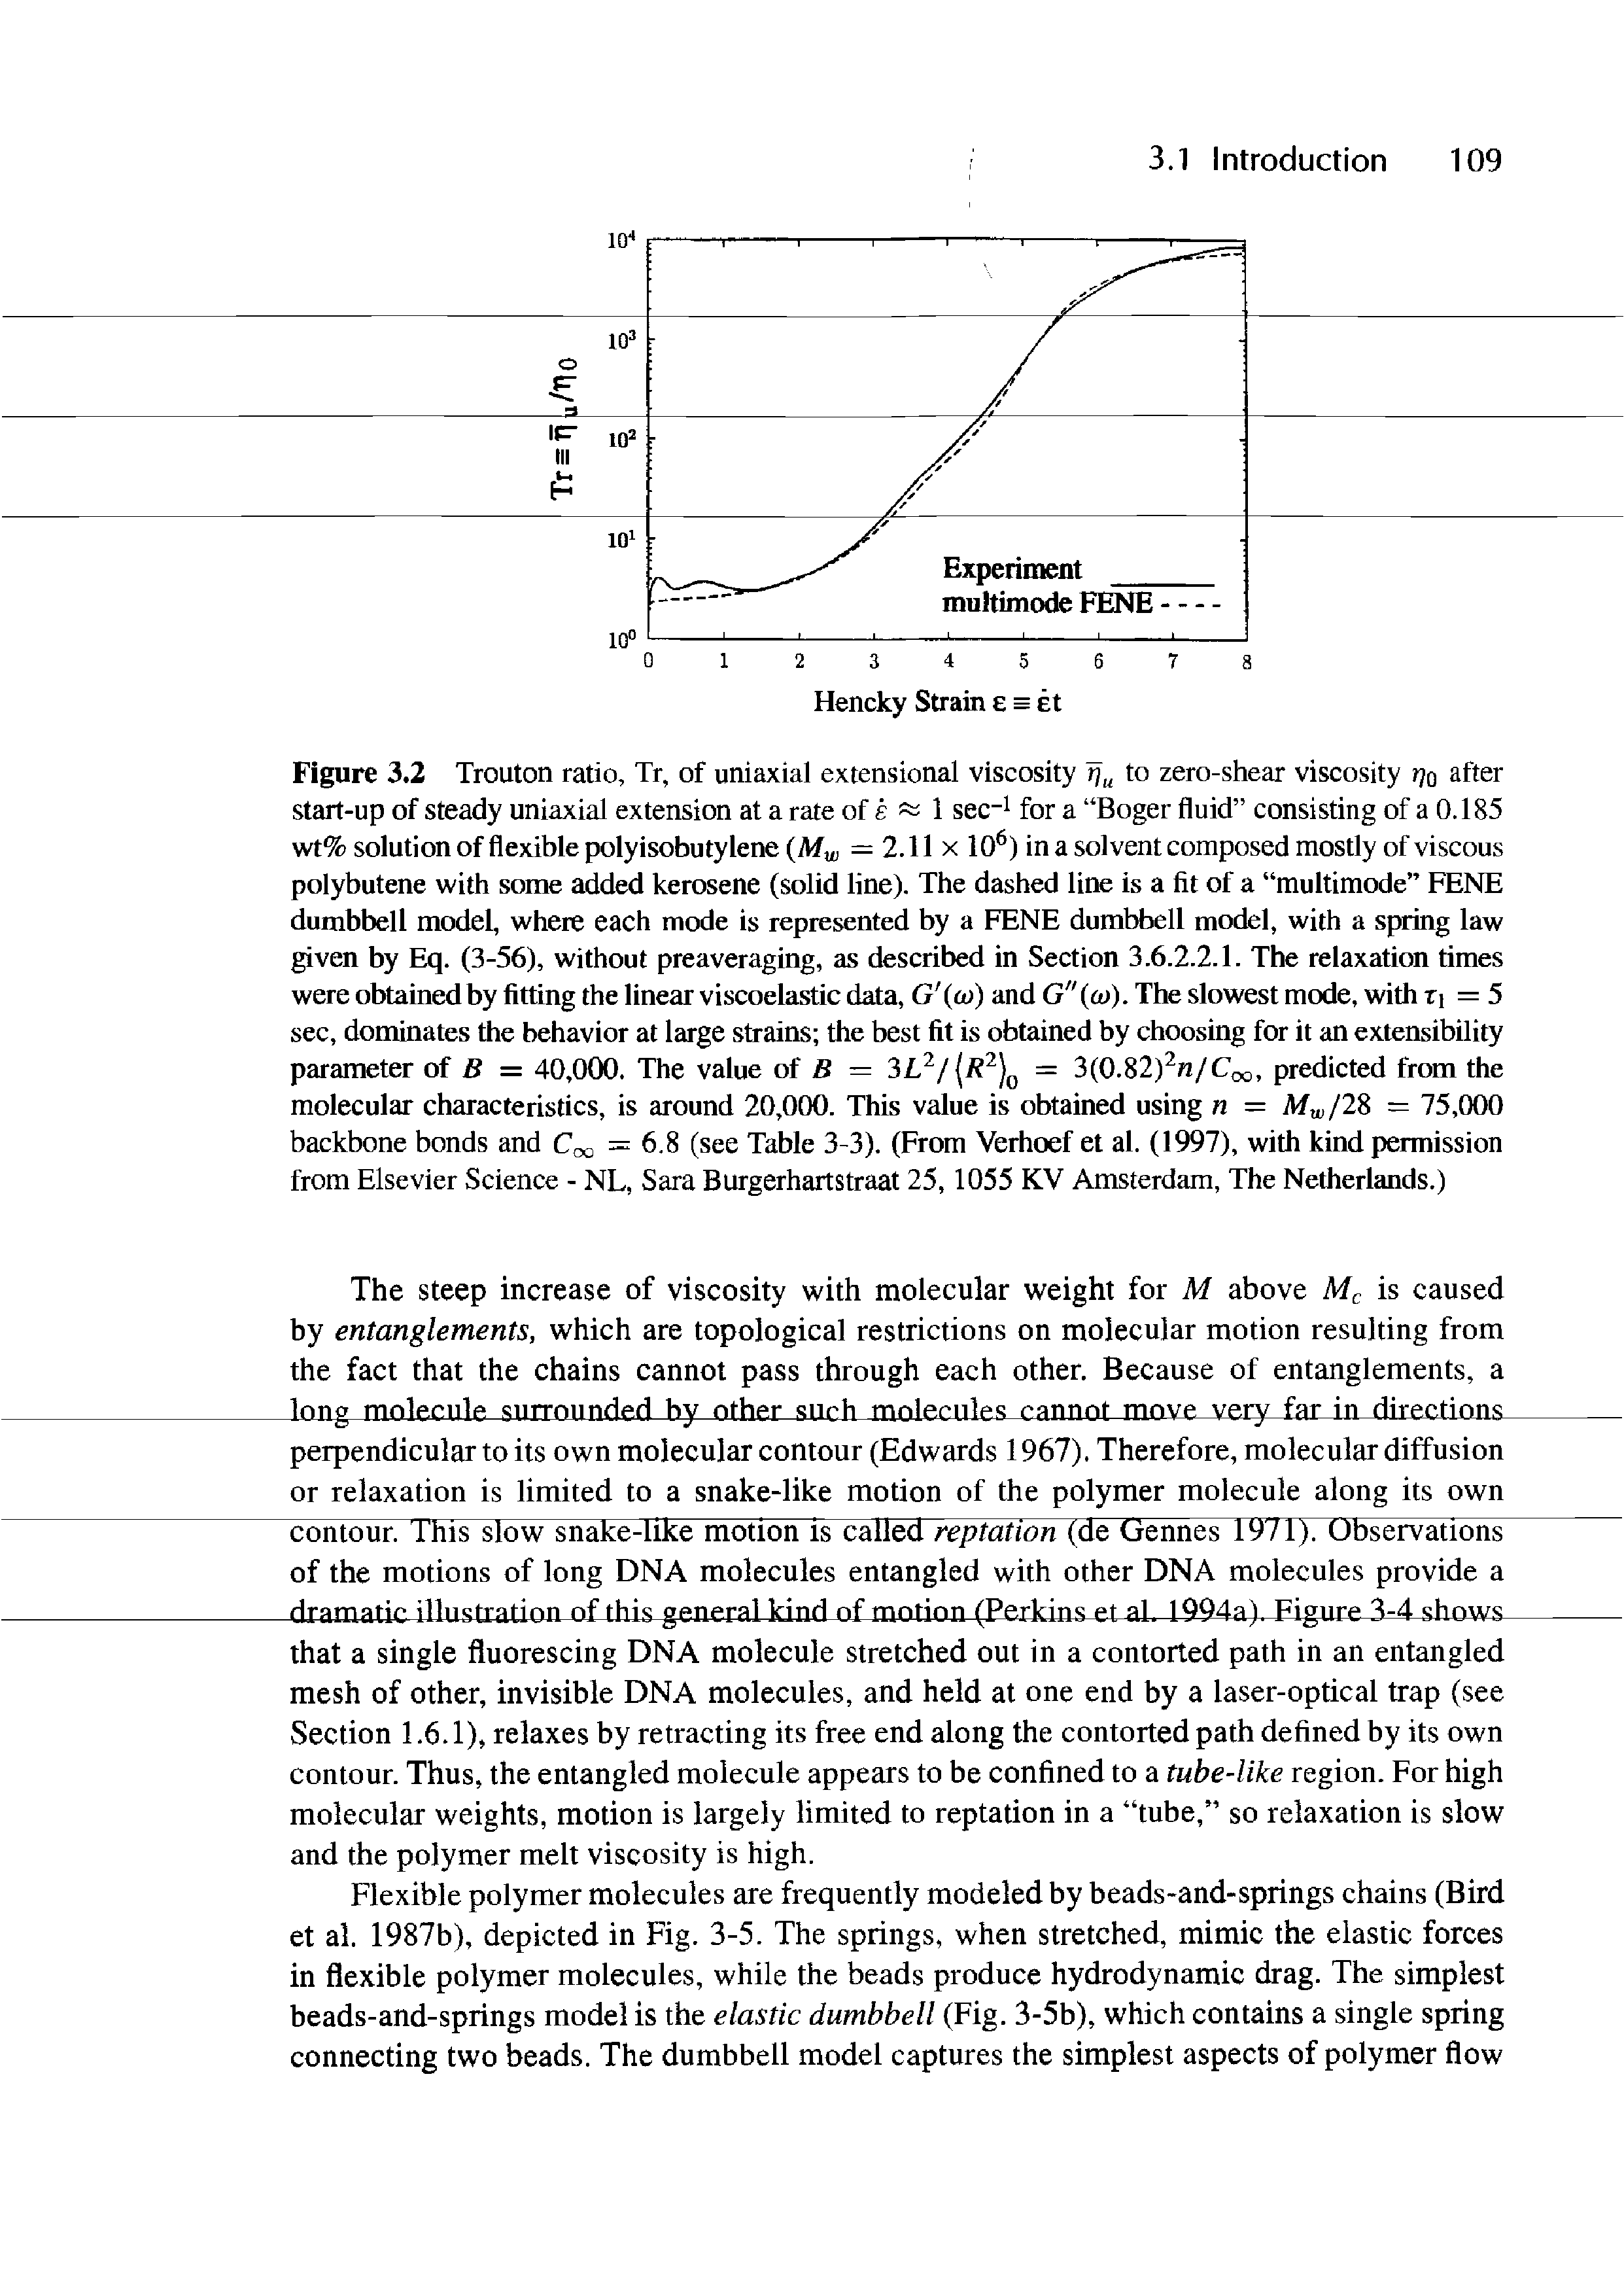 Figure 3.2 Trouton ratio, Tr, of uniaxial extensional viscosity to zero-shear viscosity jq after start-up of steady uniaxial extension at a rate of 1 sec i for a Boger fluid consisting of a 0.185 wt% solution of flexible polyisobutylene (Mu, = 2.11 x 10 ) in a solvent composed mostly of viscous polybutene with some added kerosene (solid line). The dashed line is a fit of a multimode FENE dumbbell model, where each mode is represented by a FENE dumbbell model, with a spring law given by Eq. (3-56), without preaveraging, as described in Section 3.6.2.2.I. The relaxation times were obtained by fitting the linear viscoelastic data, G (co) and G"(cu). The slowest mode, with ri = 5 sec, dominates the behavior at large strains the best fit is obtained by choosing for it an extensibility parameter of = 40,000. The value of S — = 3(0.82) n/C(x, predicted from the...